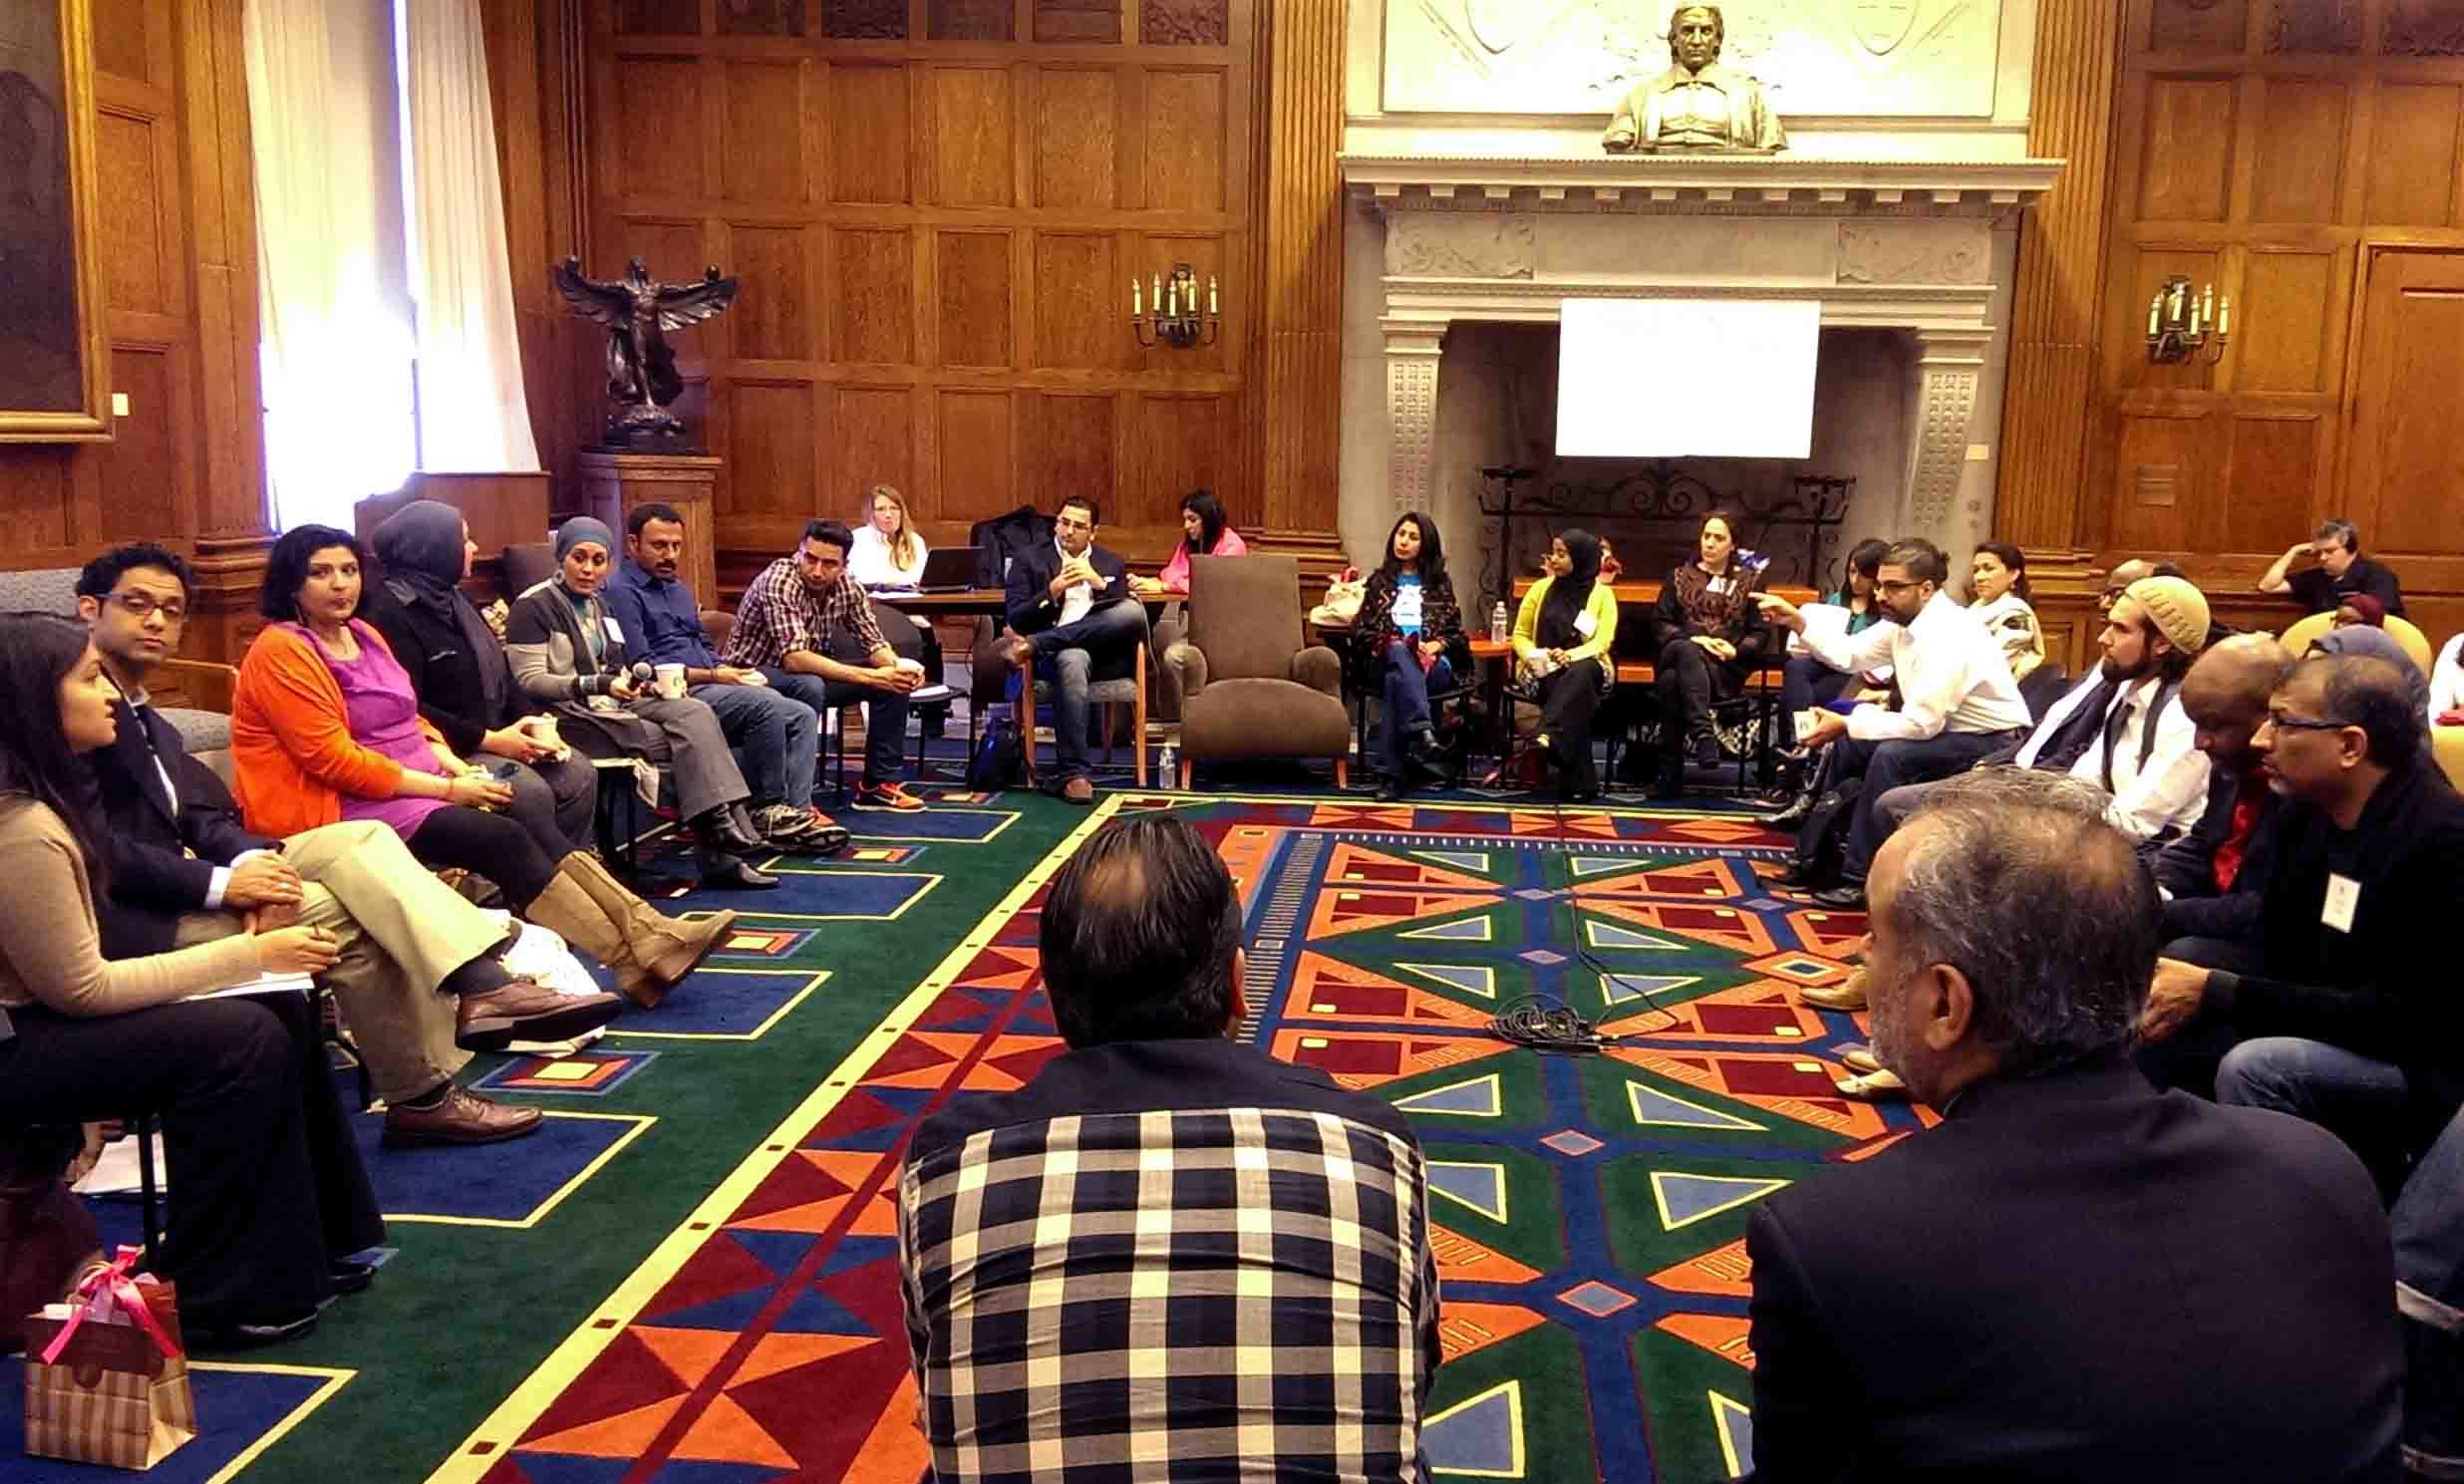 Attendees of the (Re)presenting American Muslim workshop sit in a circle discussing key topics